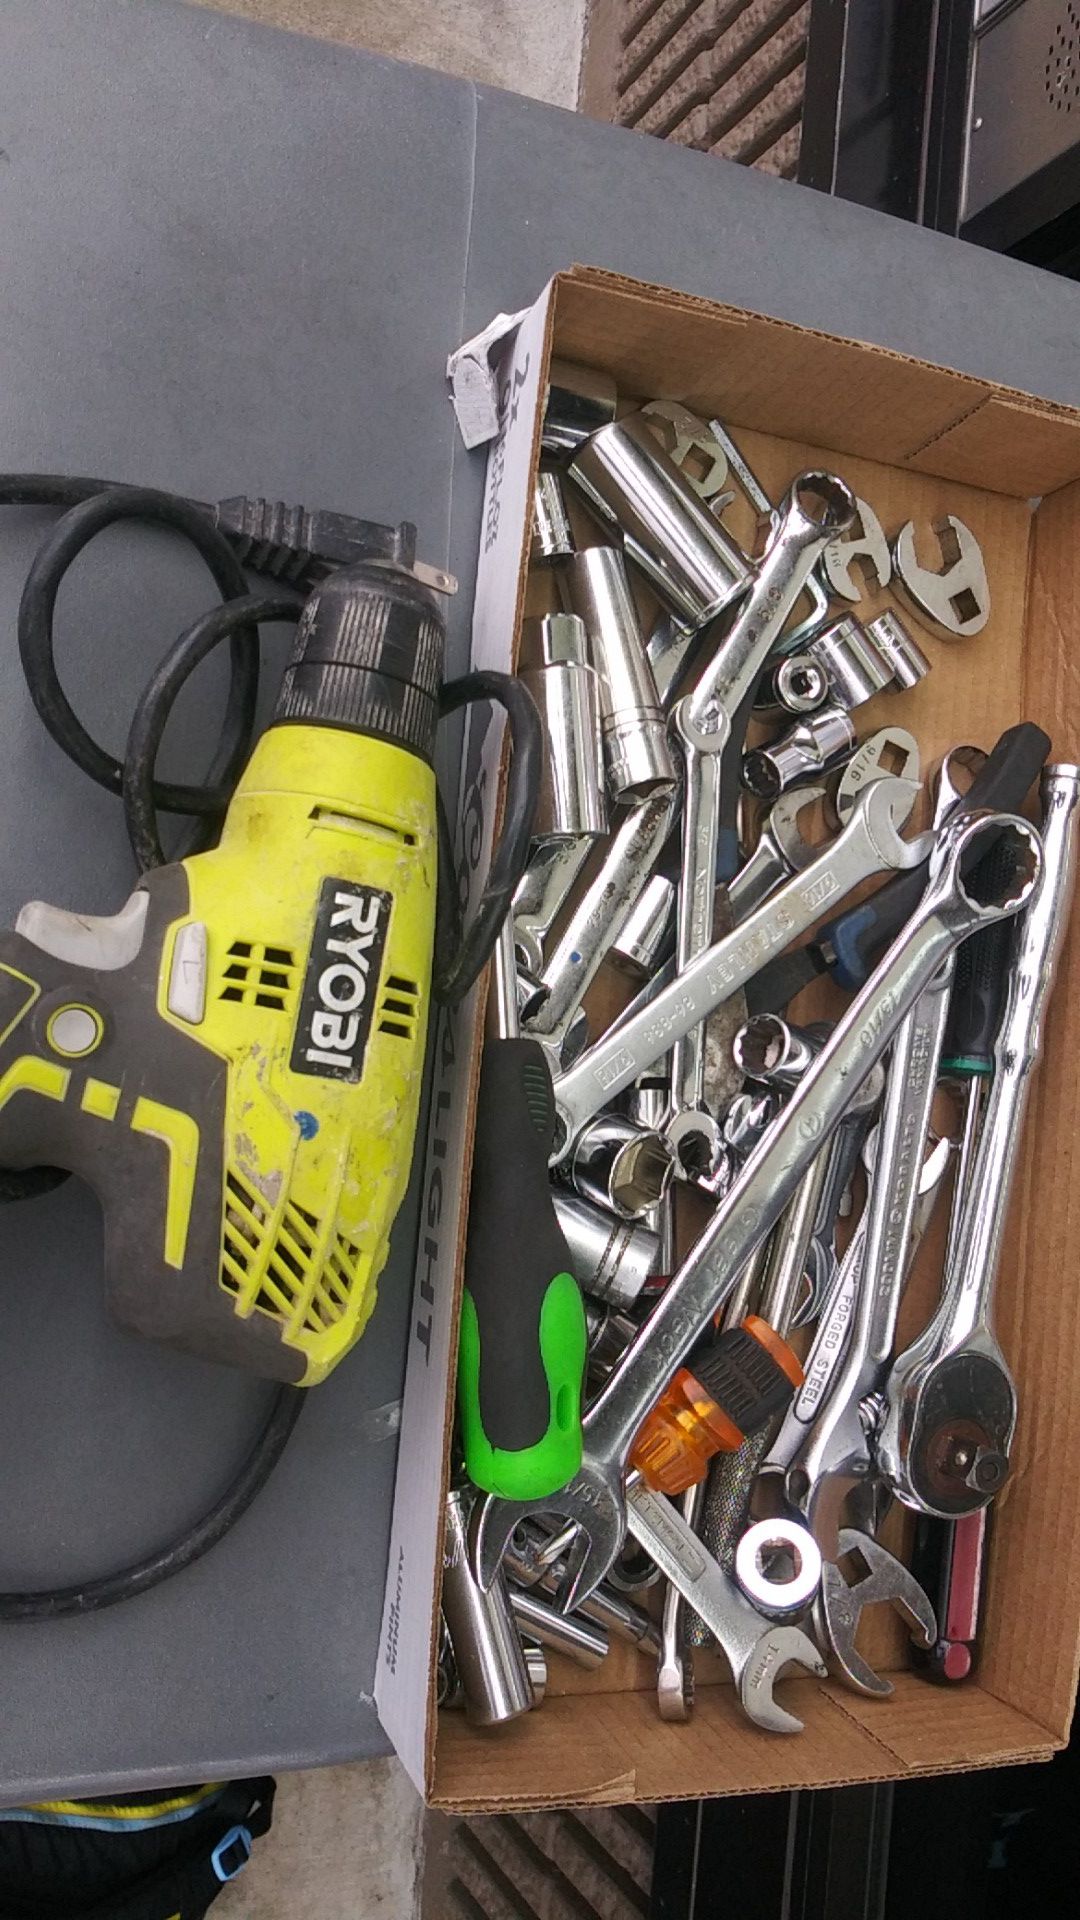 Ryobi drill..and sockets wrenches..ect..